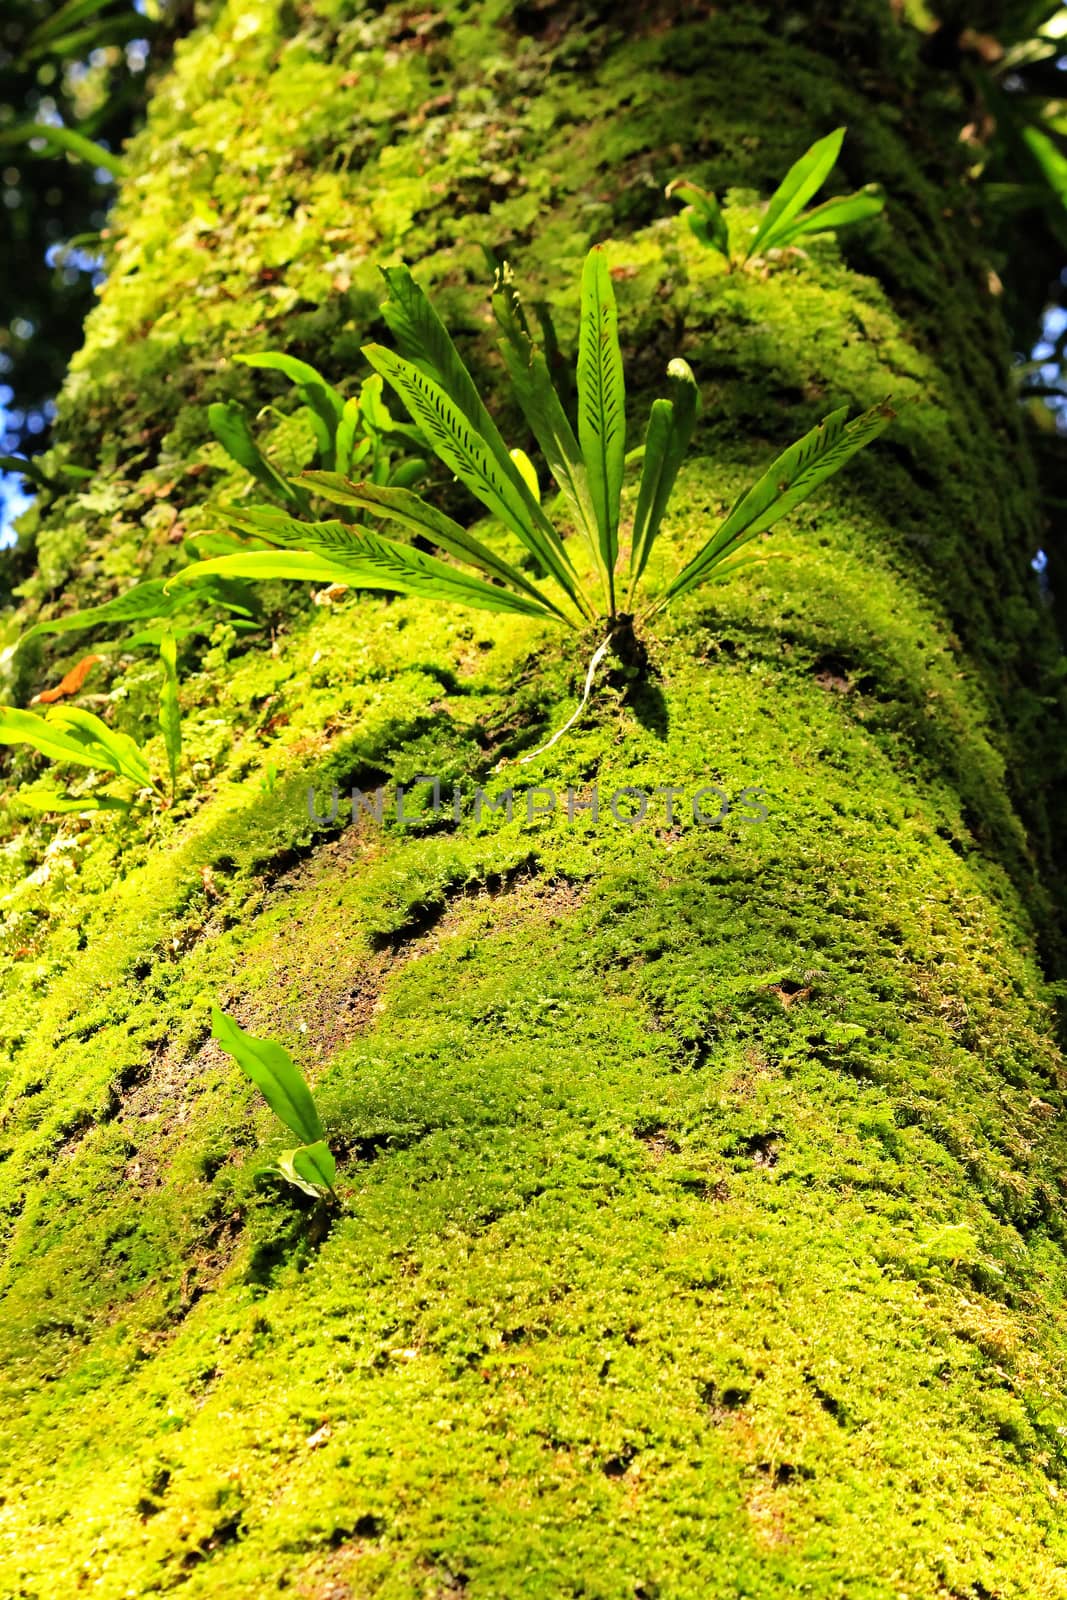 Moss green on the tree trunk In the fertile forest